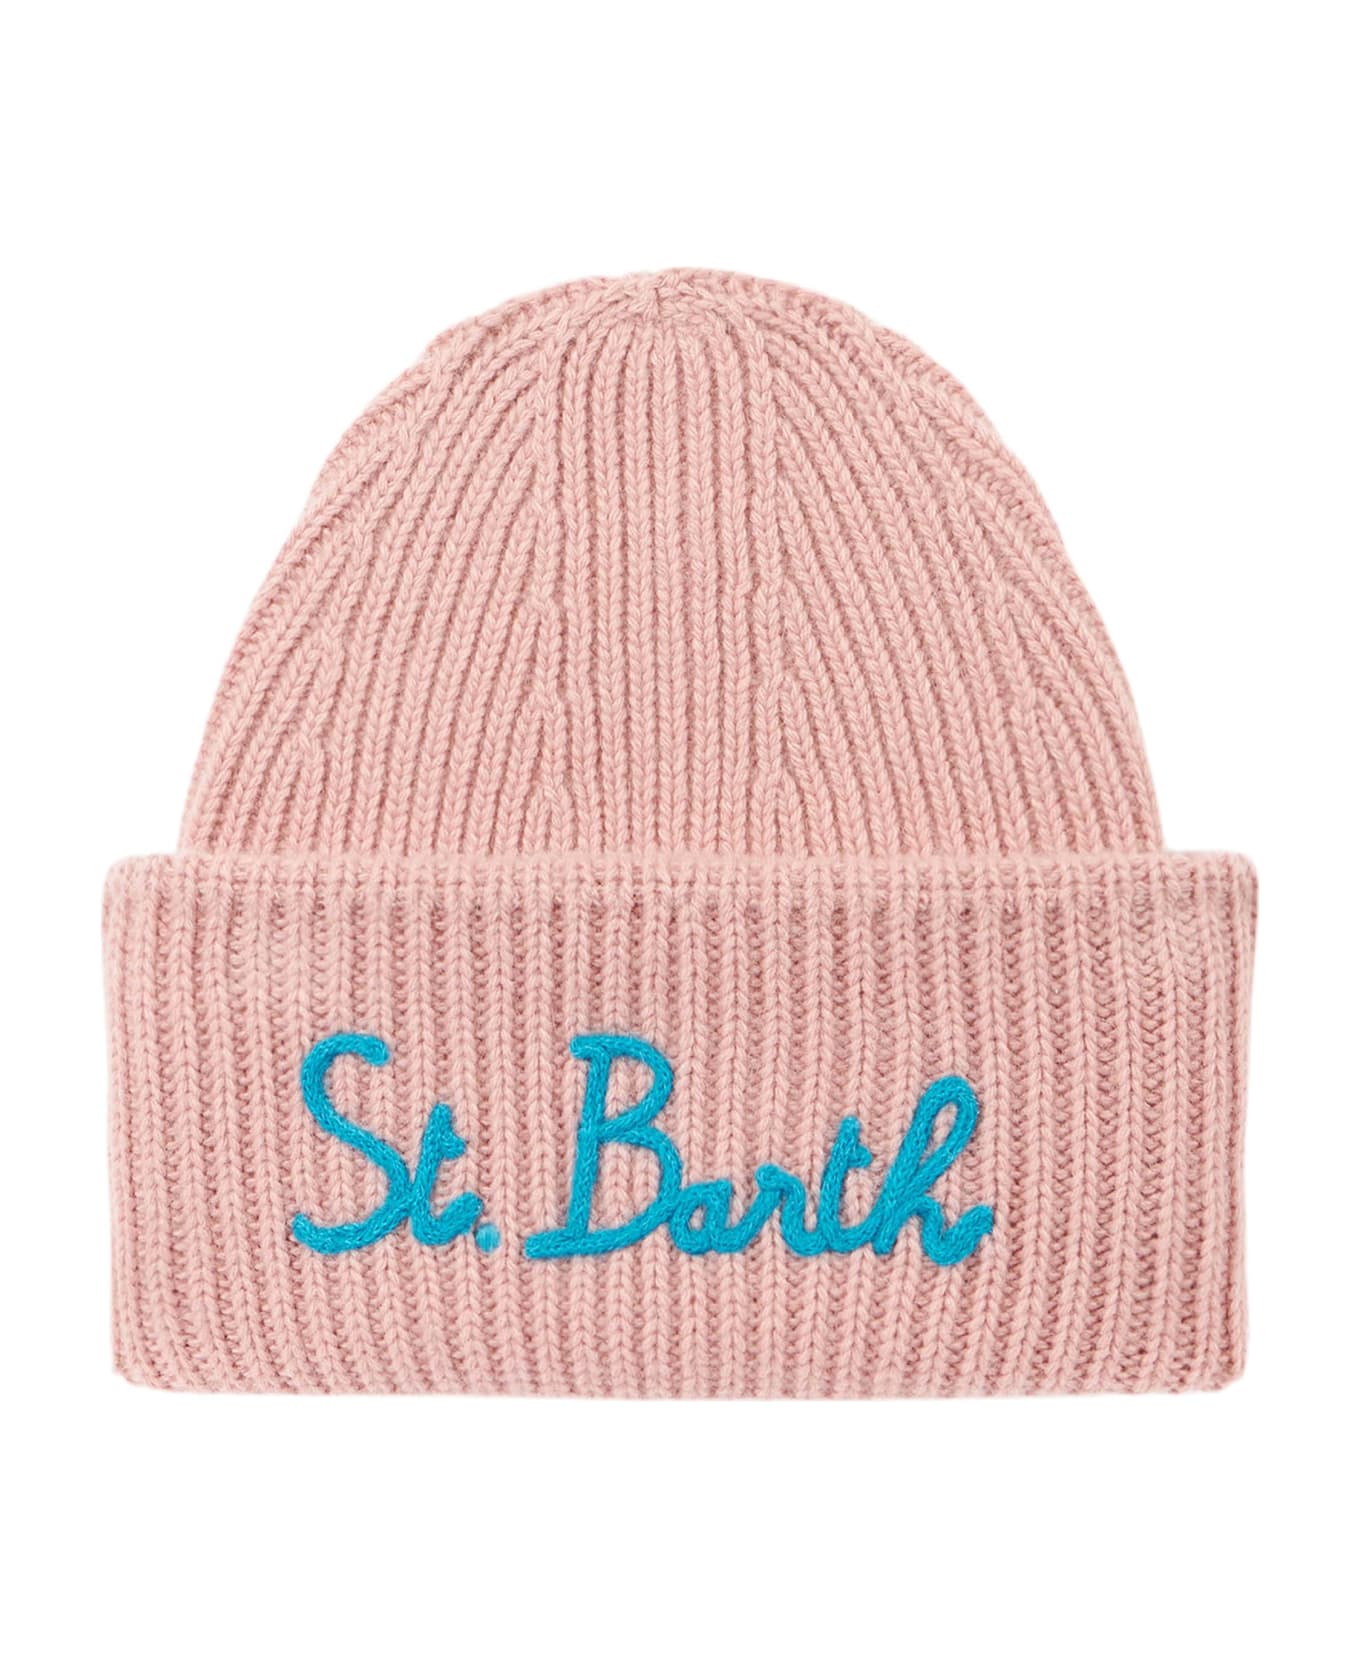 MC2 Saint Barth Woman Knit Beanie With St. Barth Embroidery - PINK